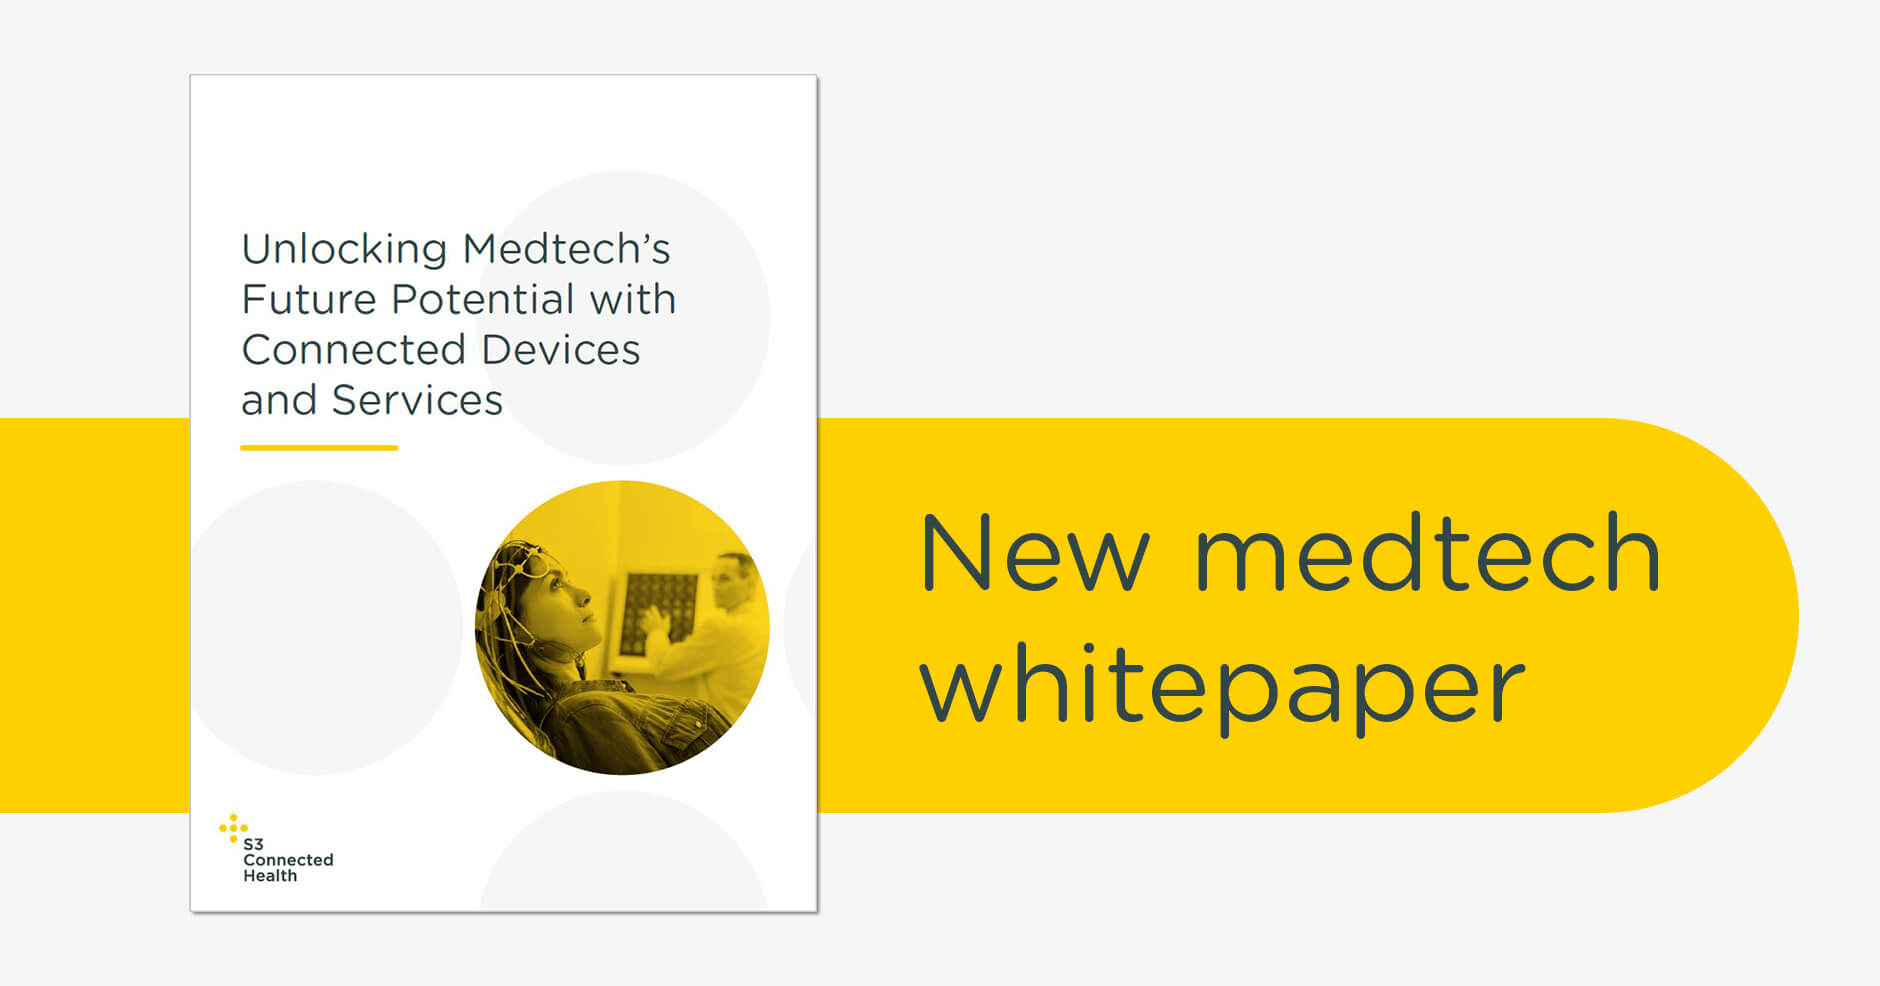 Unlocking Medtech’s Future Potential with Connected Devices and Services